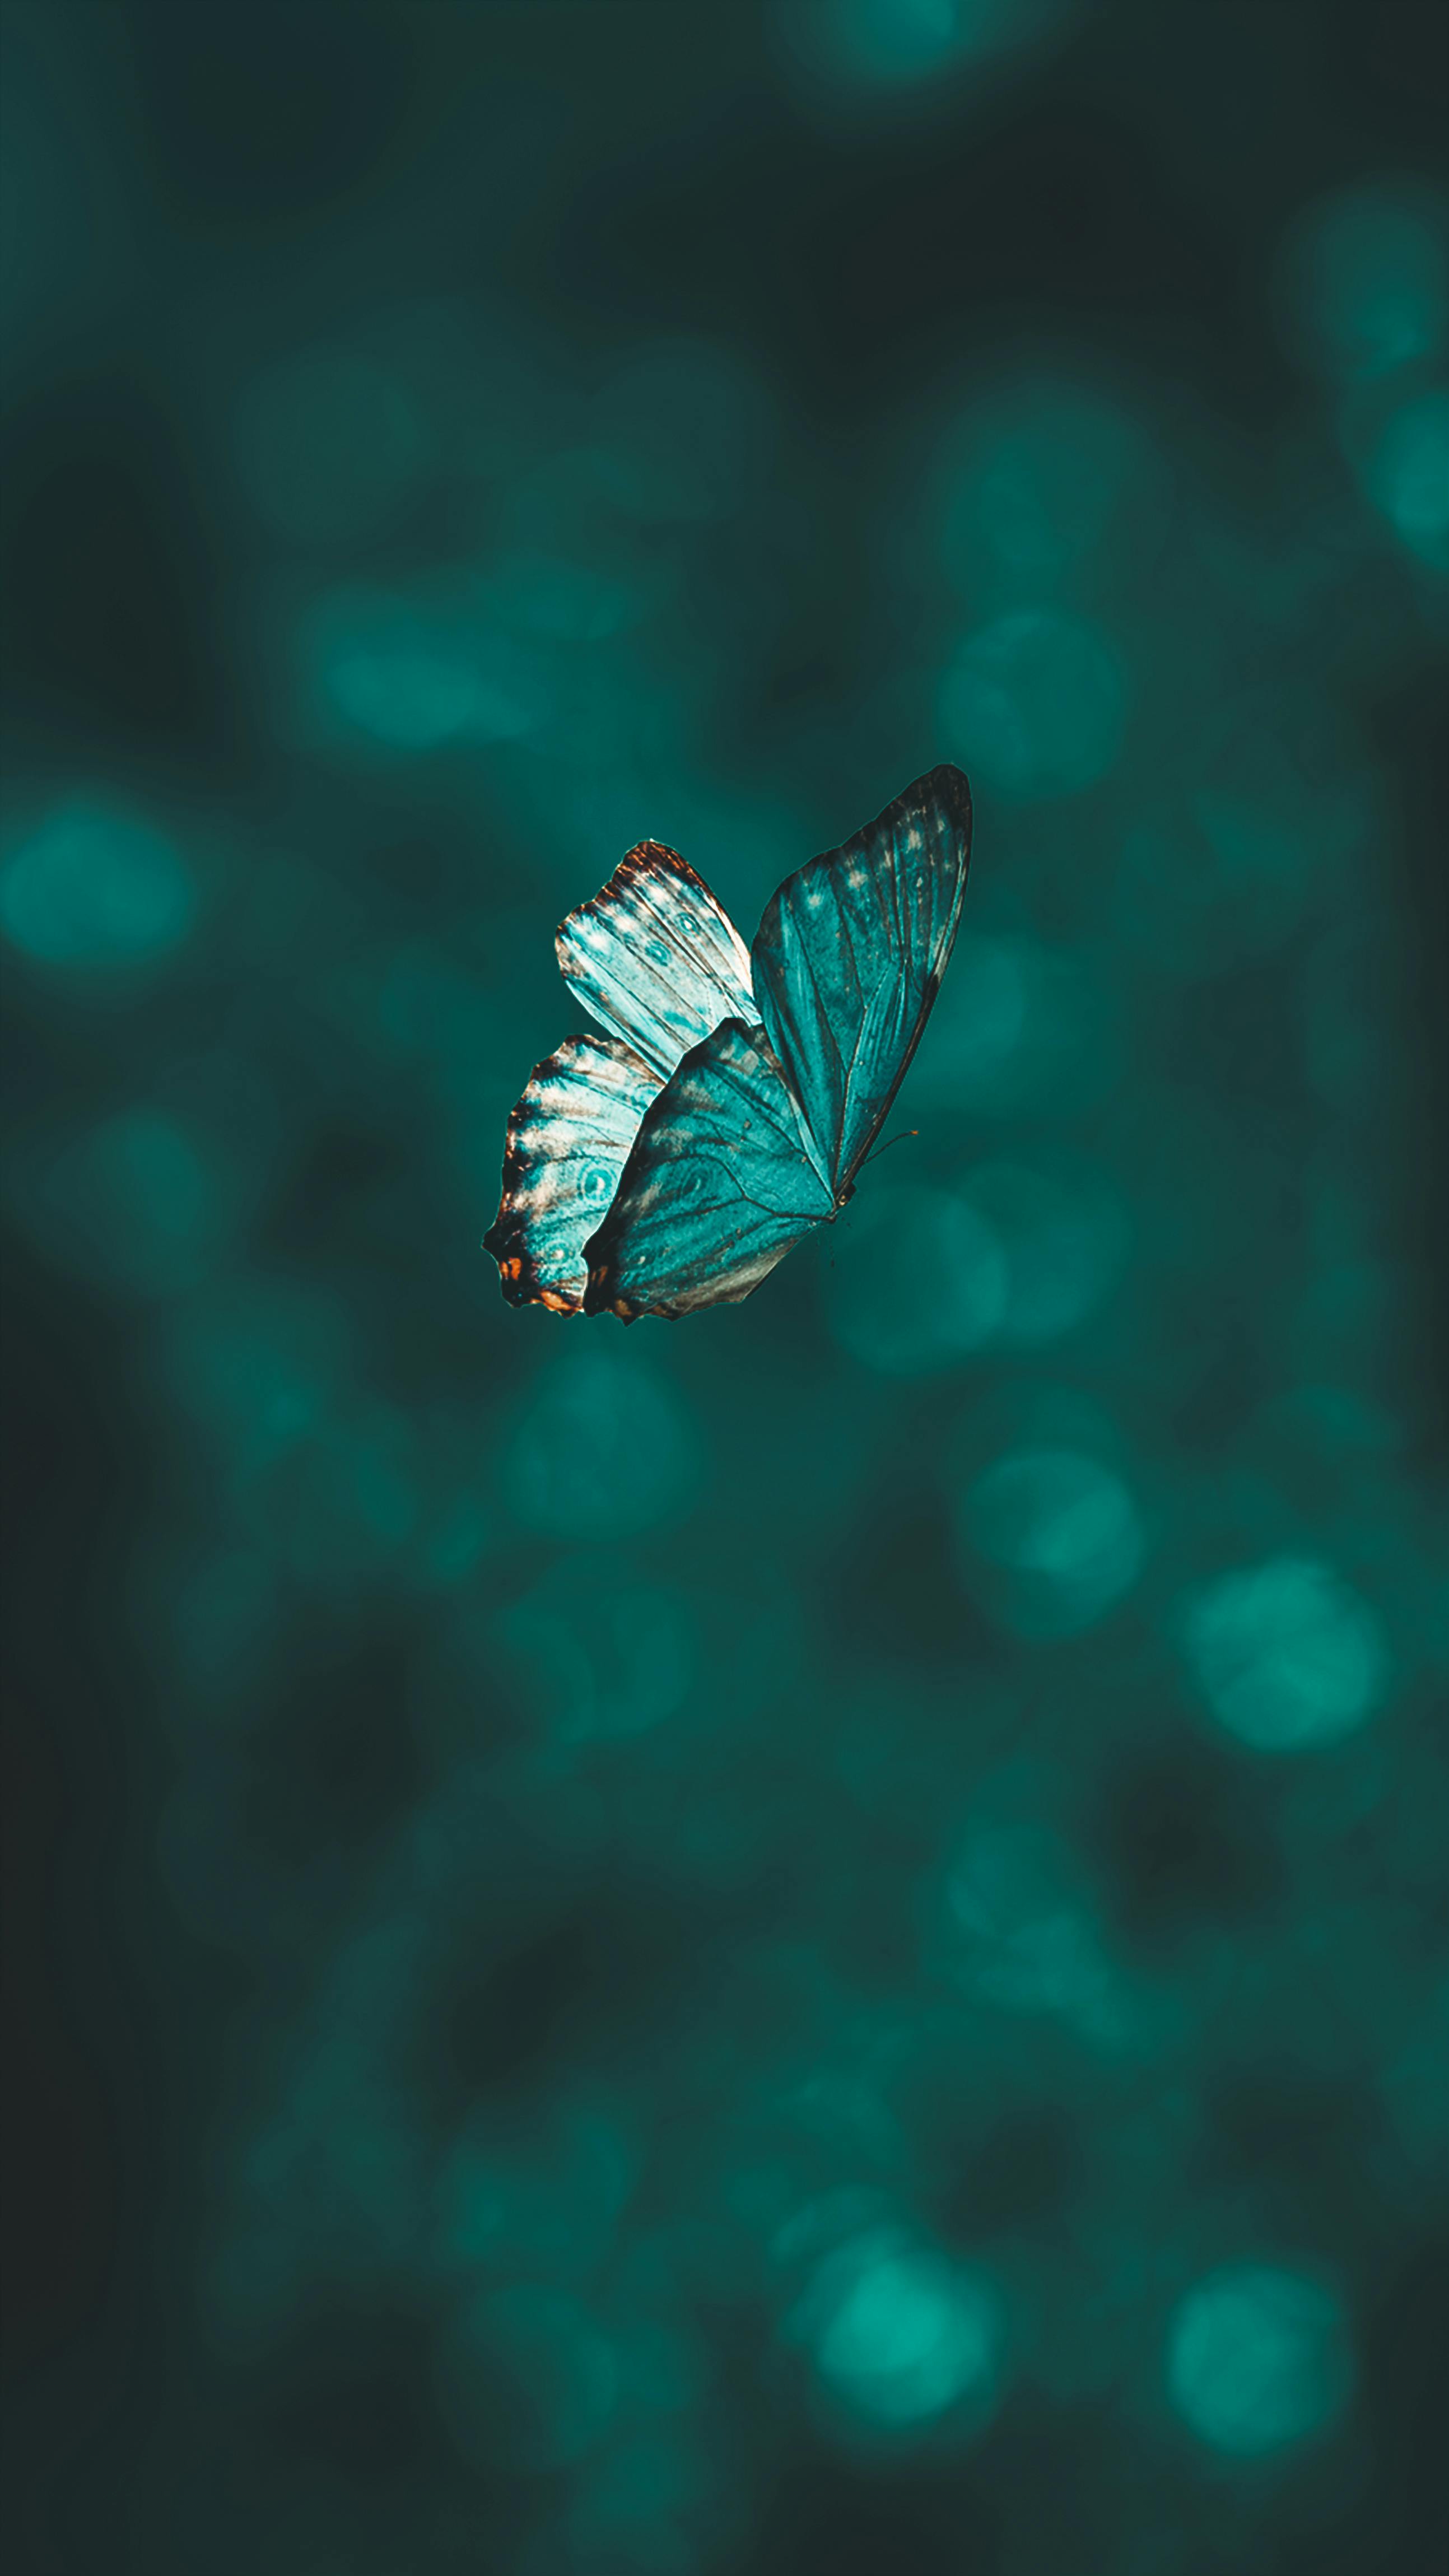 Download A Beautiful Blue Butterfly on a Vibrant Green Leaf  Wallpaperscom